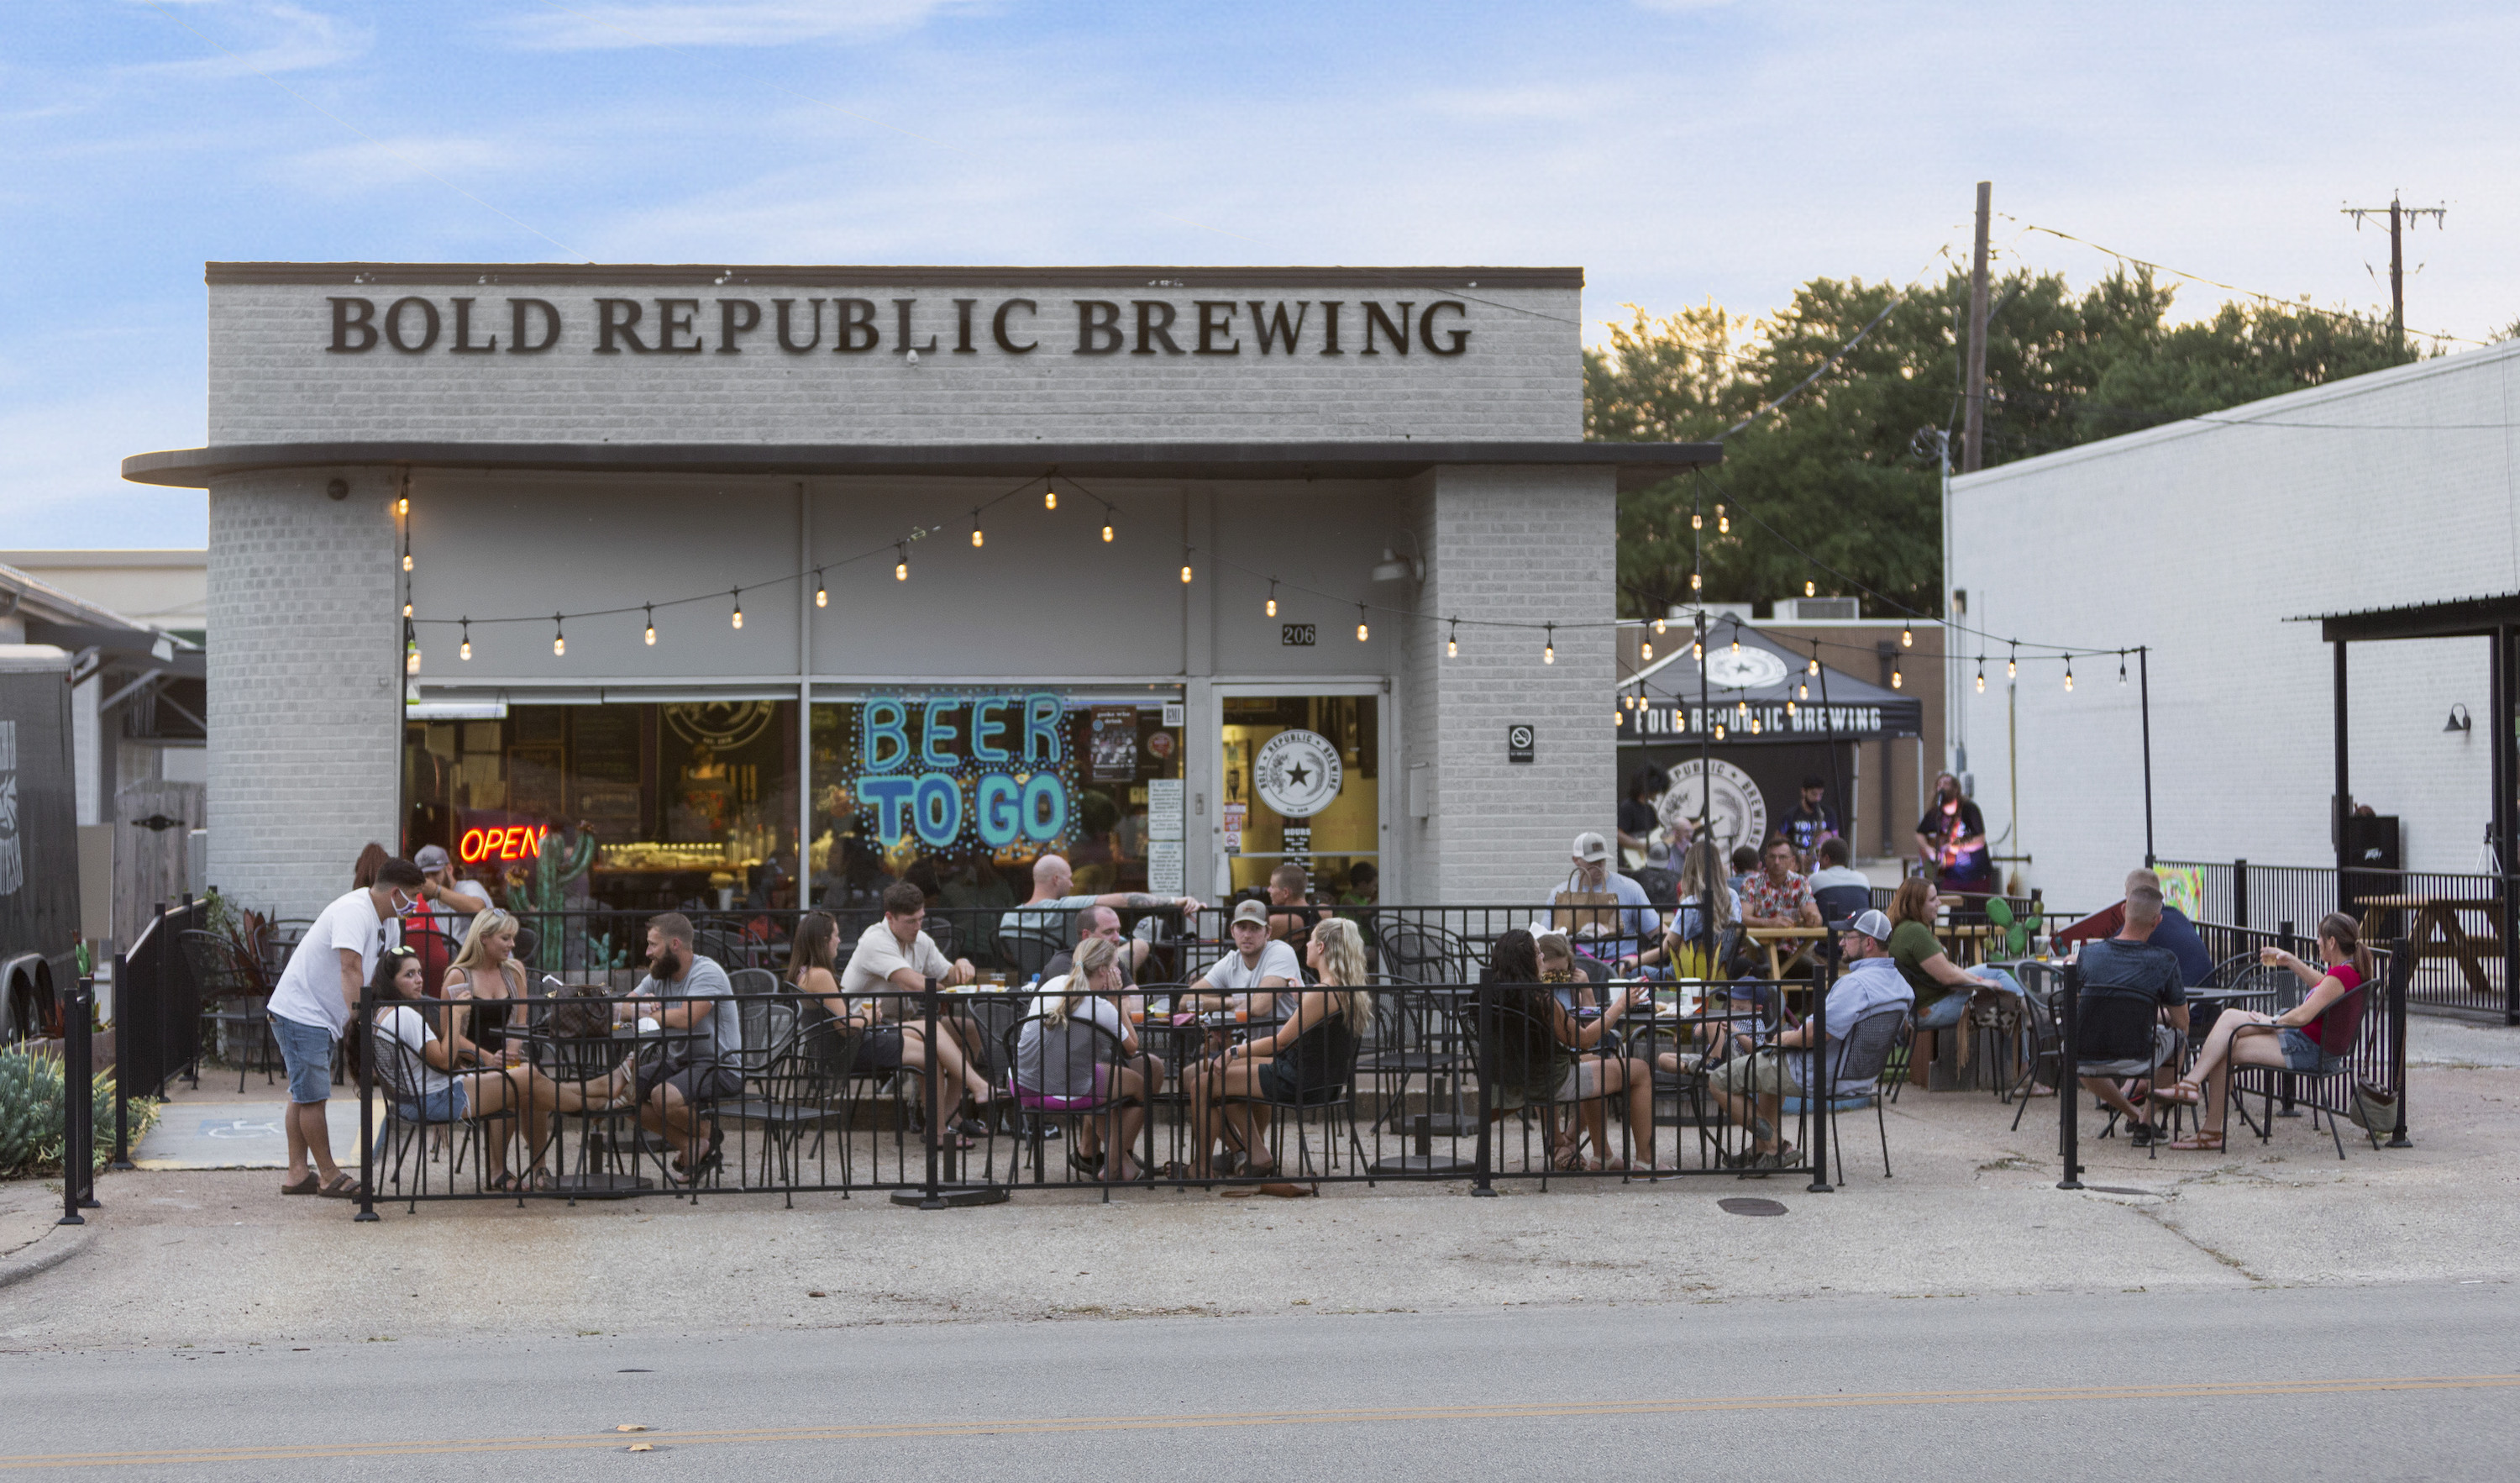 People eating outside at Bold Replublic Brewing company